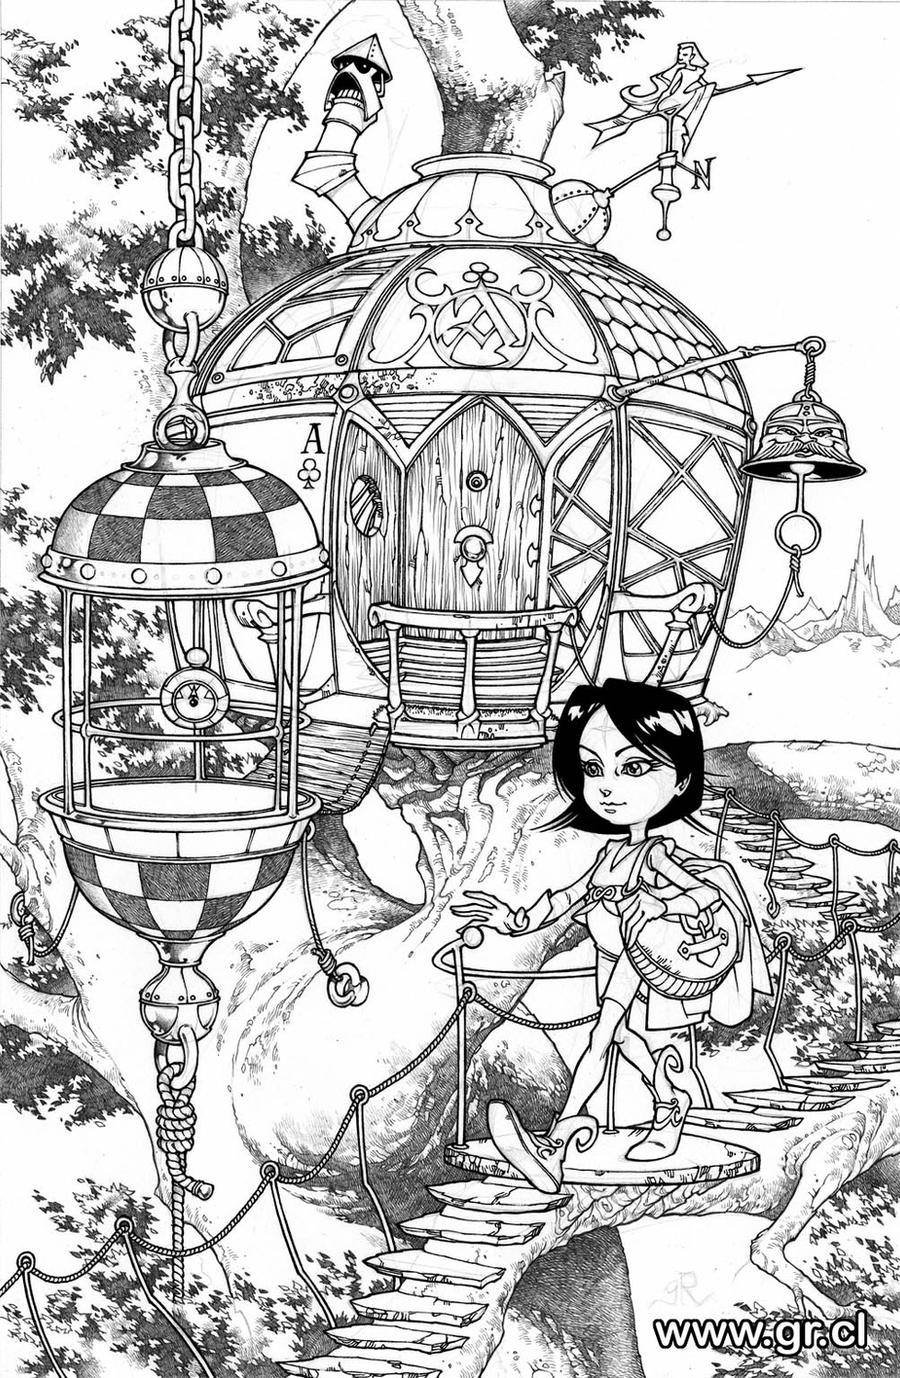 Treehouse inks and pencil